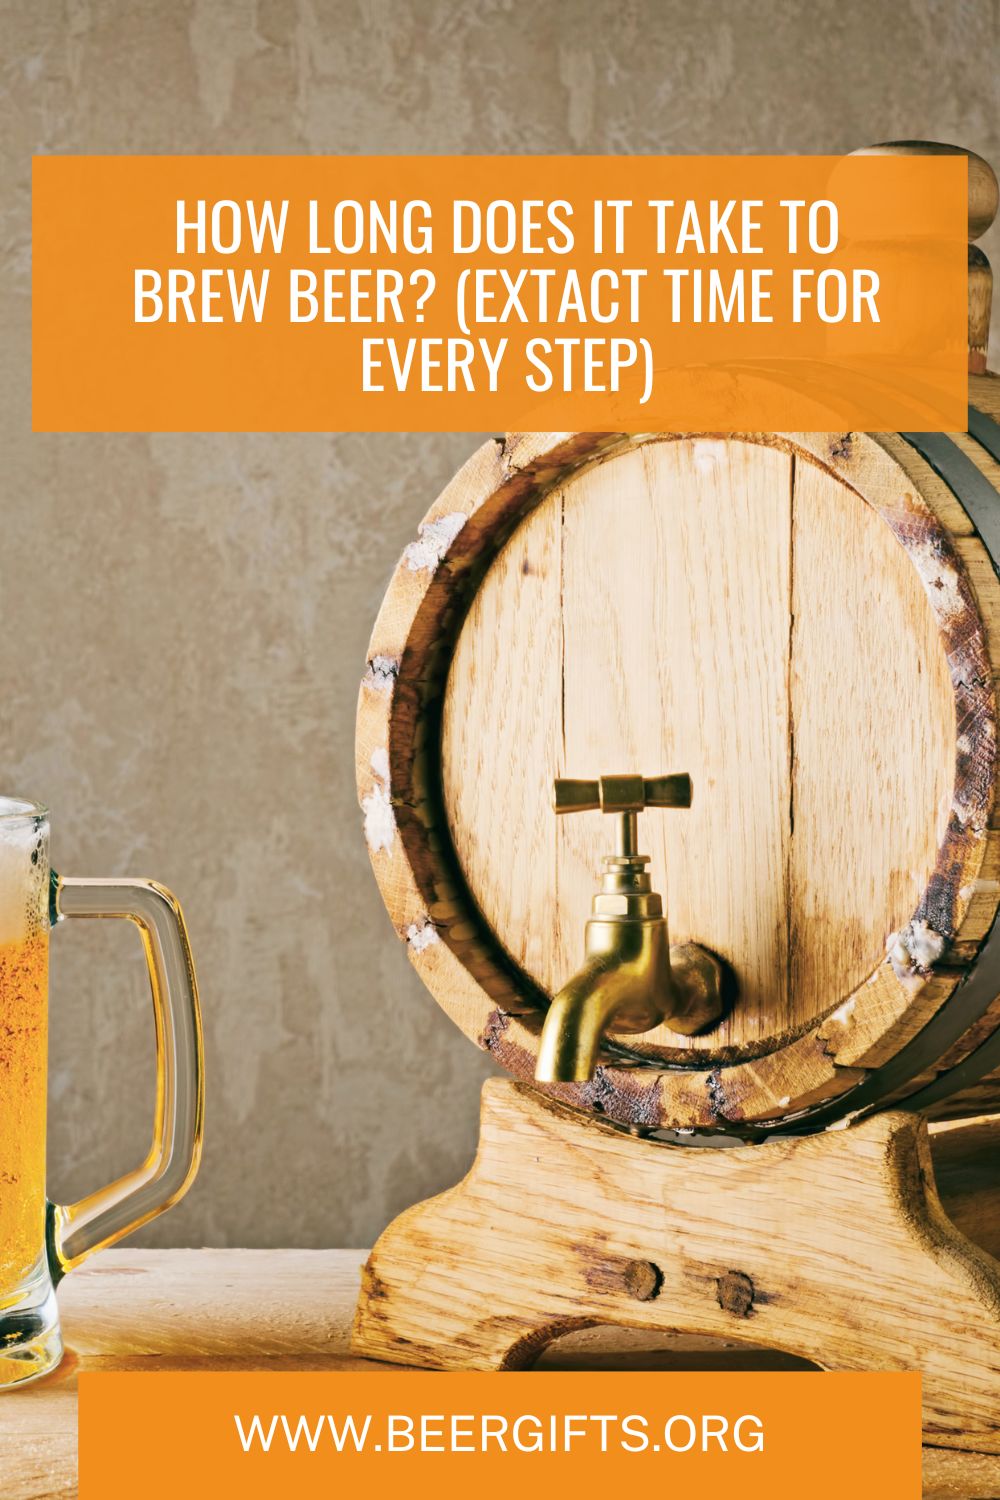 How Long Does It Take to Brew Beer (Extact Time for Every Step)2